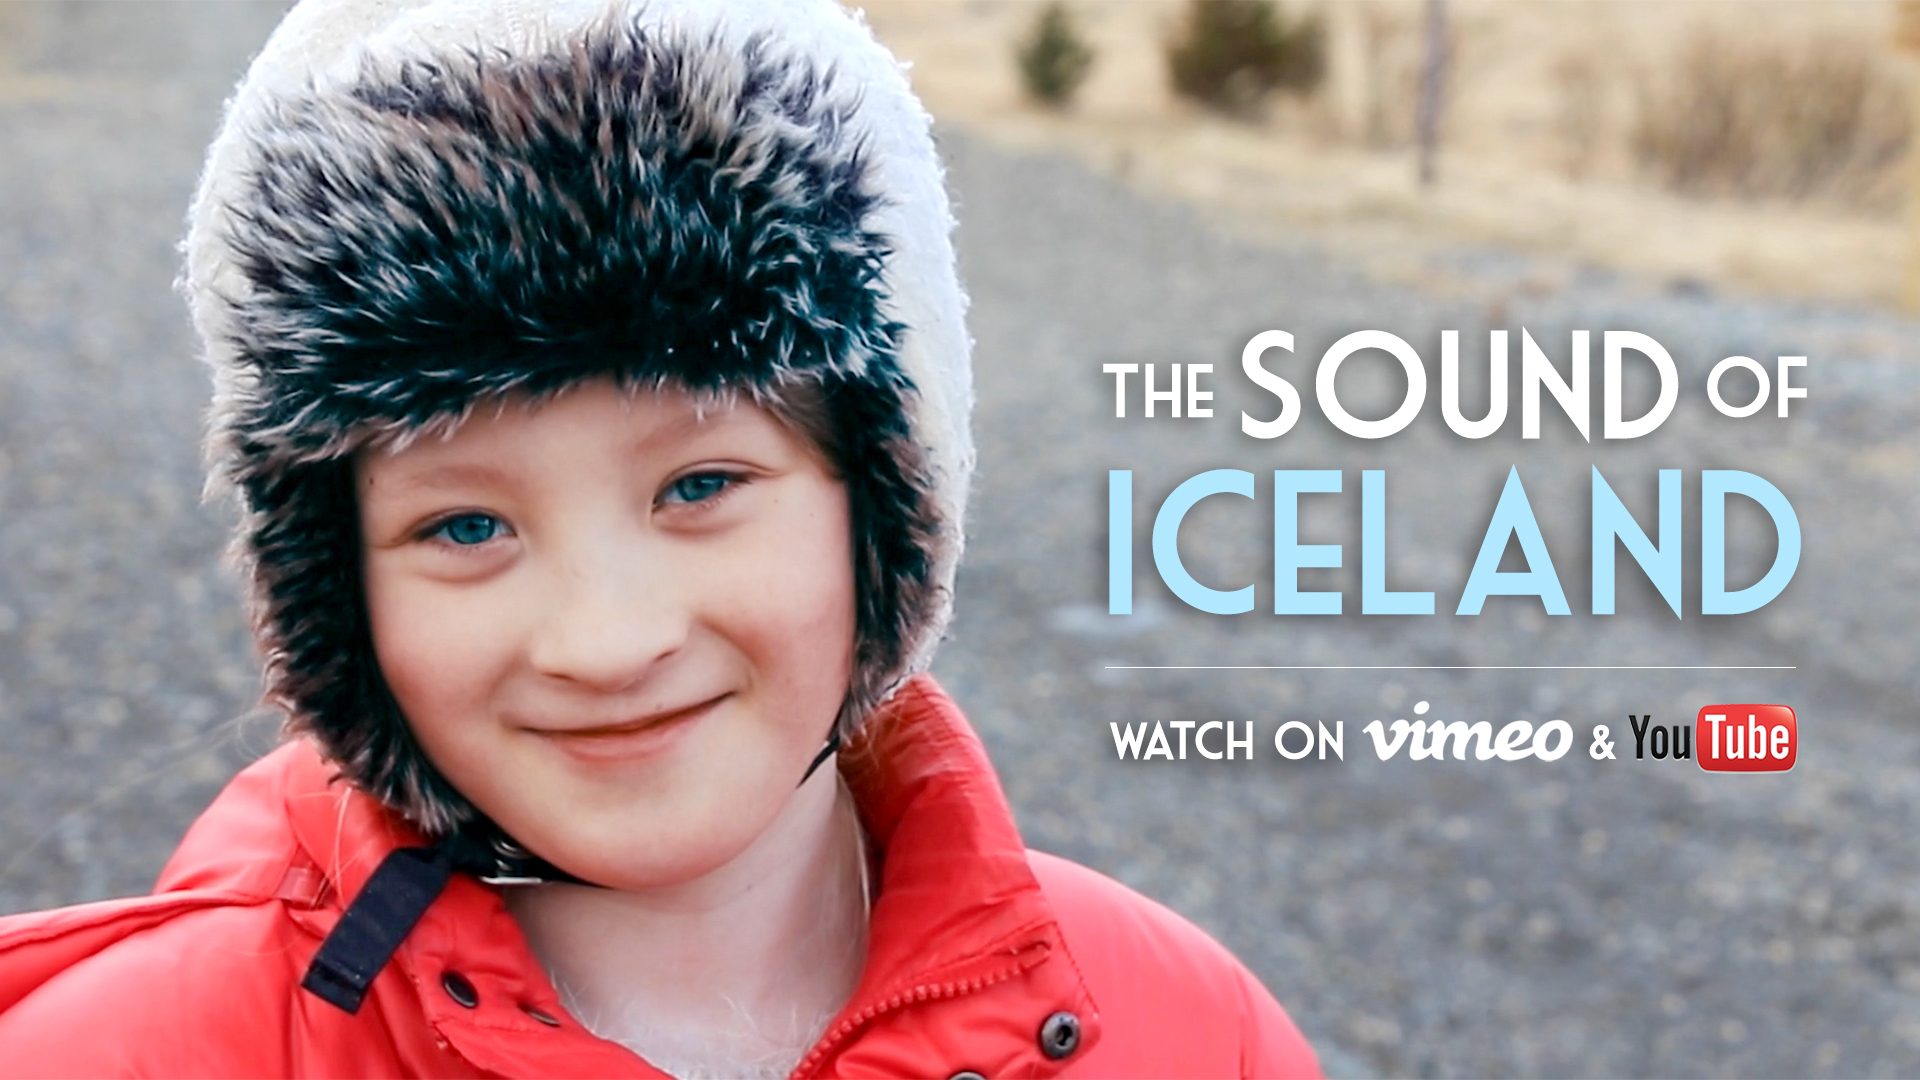 The-Sound-of-Iceland-title-thumbnail-girl